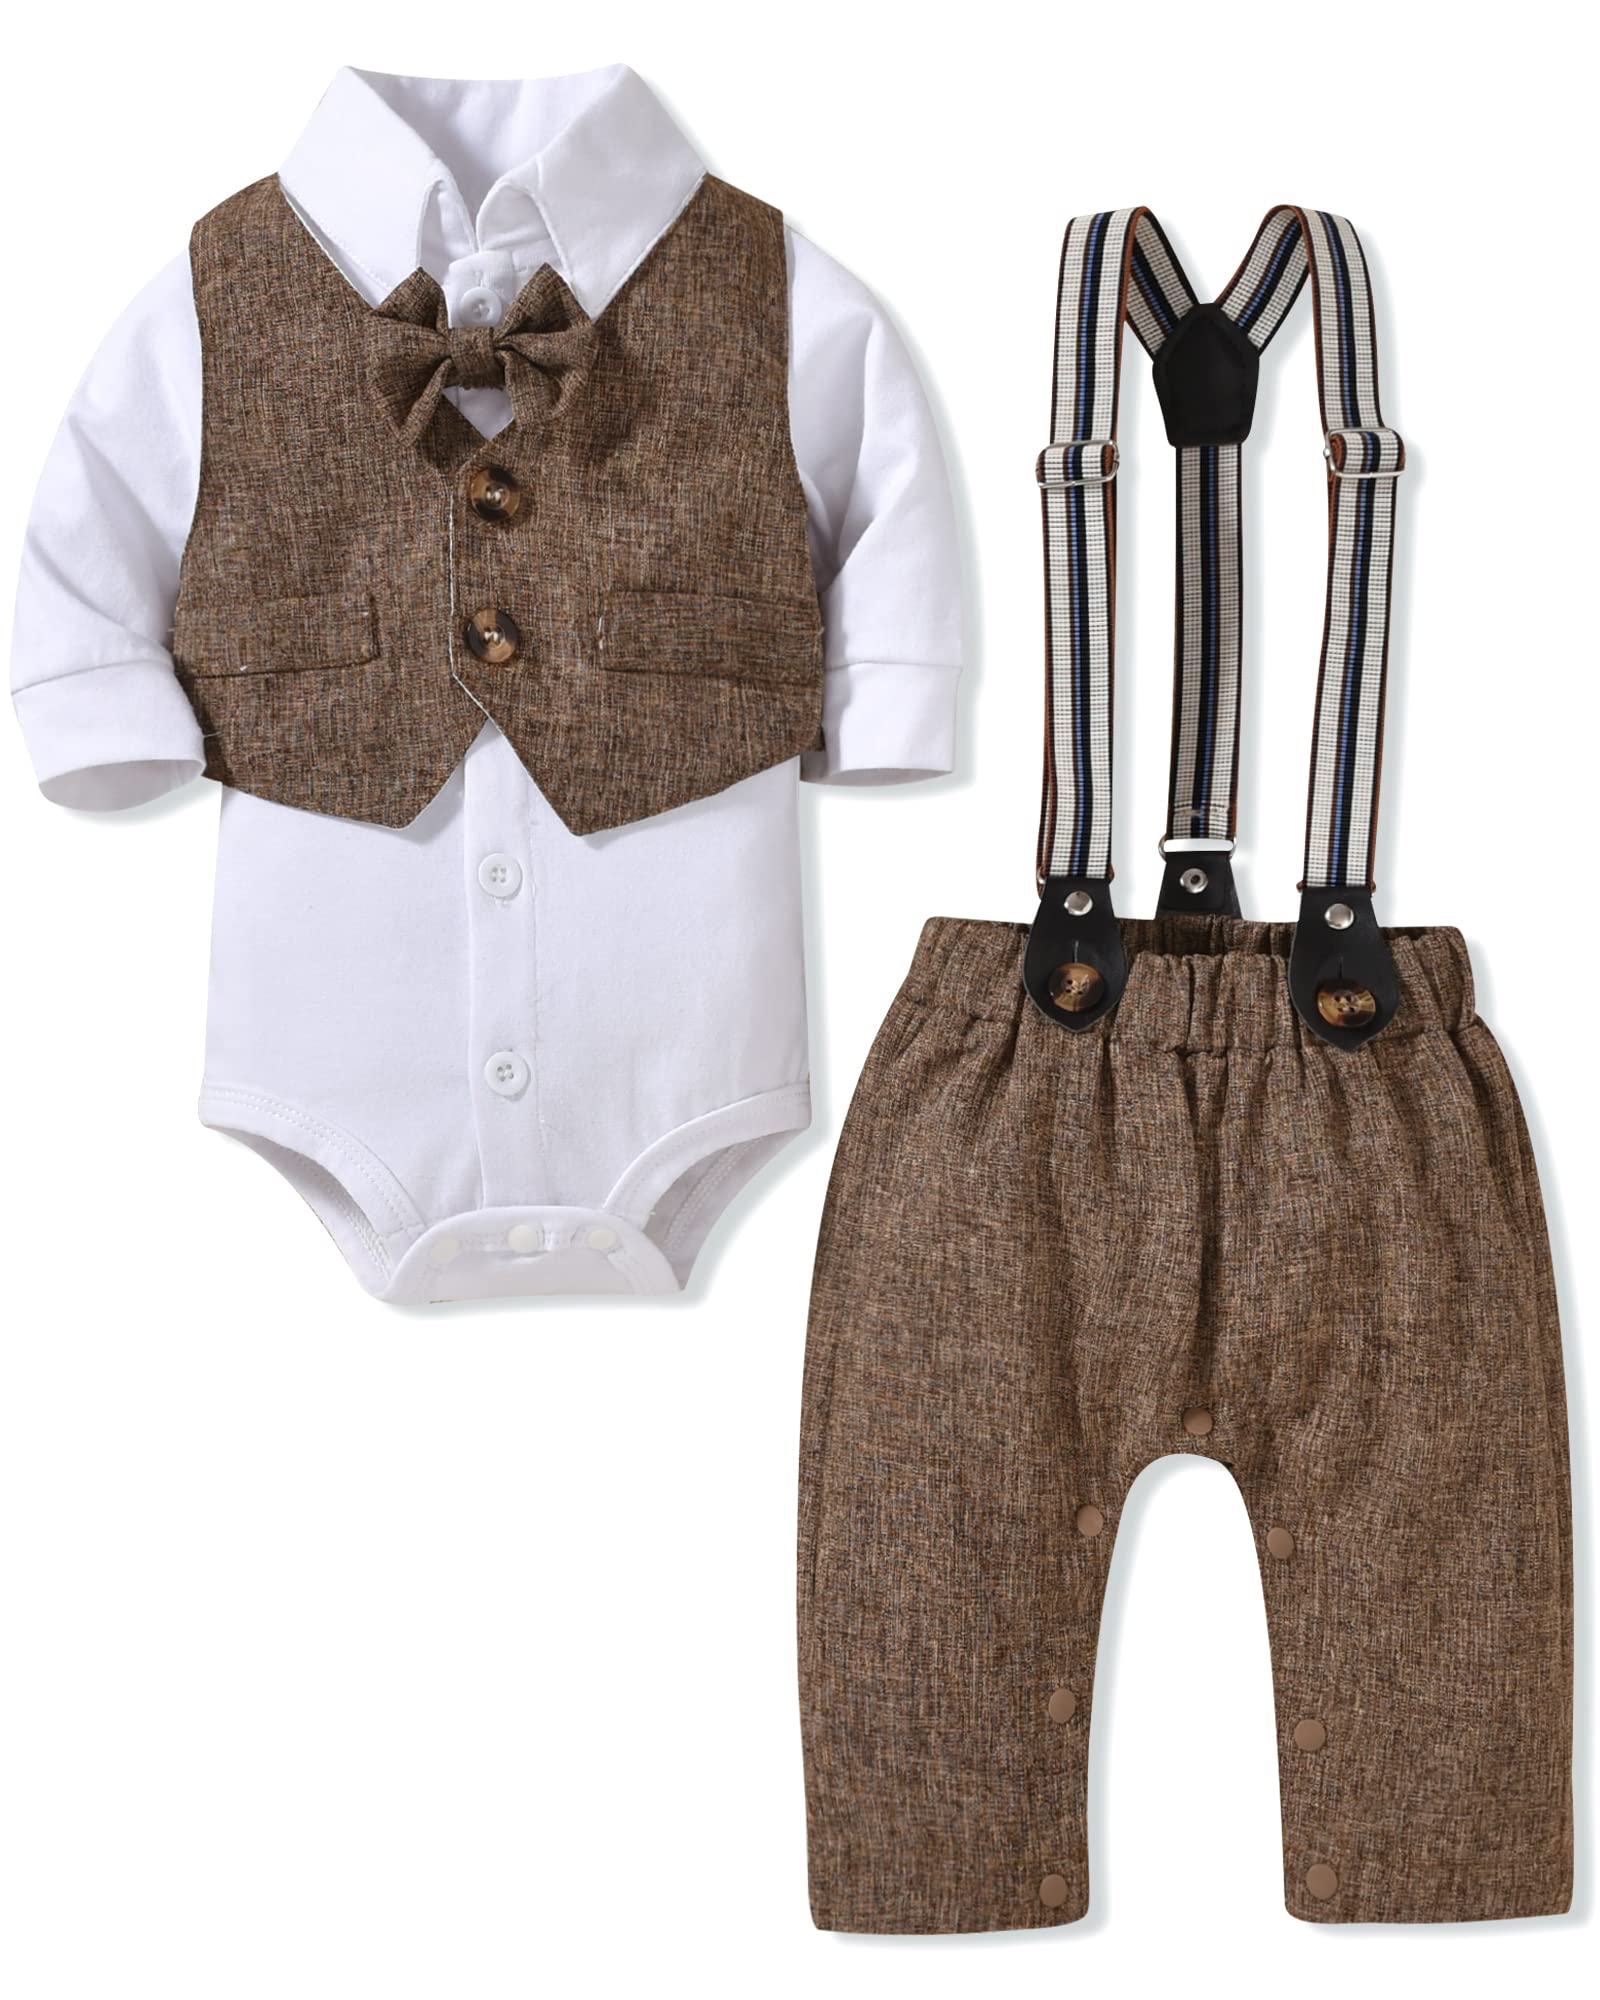 Baby Boys Gentleman Outfit 3 Piece Formal Suit Set with Snaps